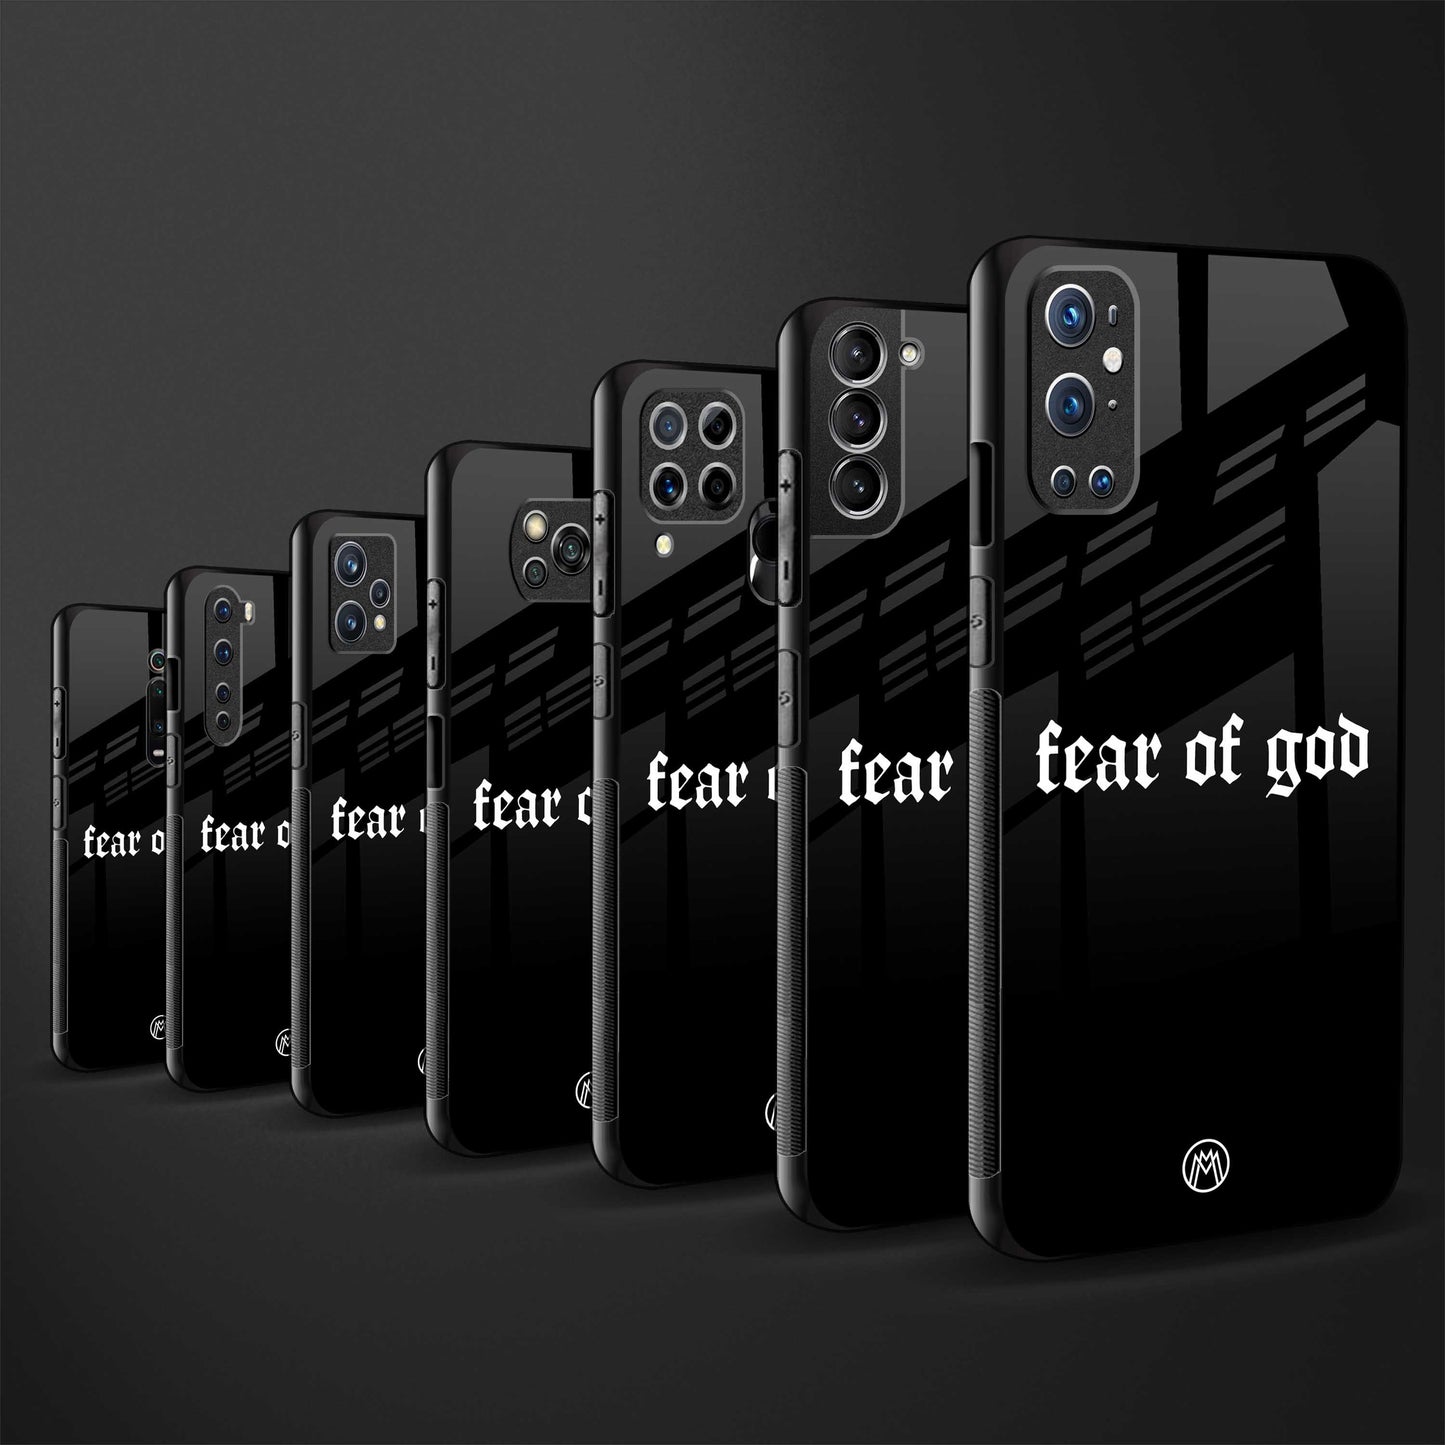 fear of god phone cover for samsung galaxy a20